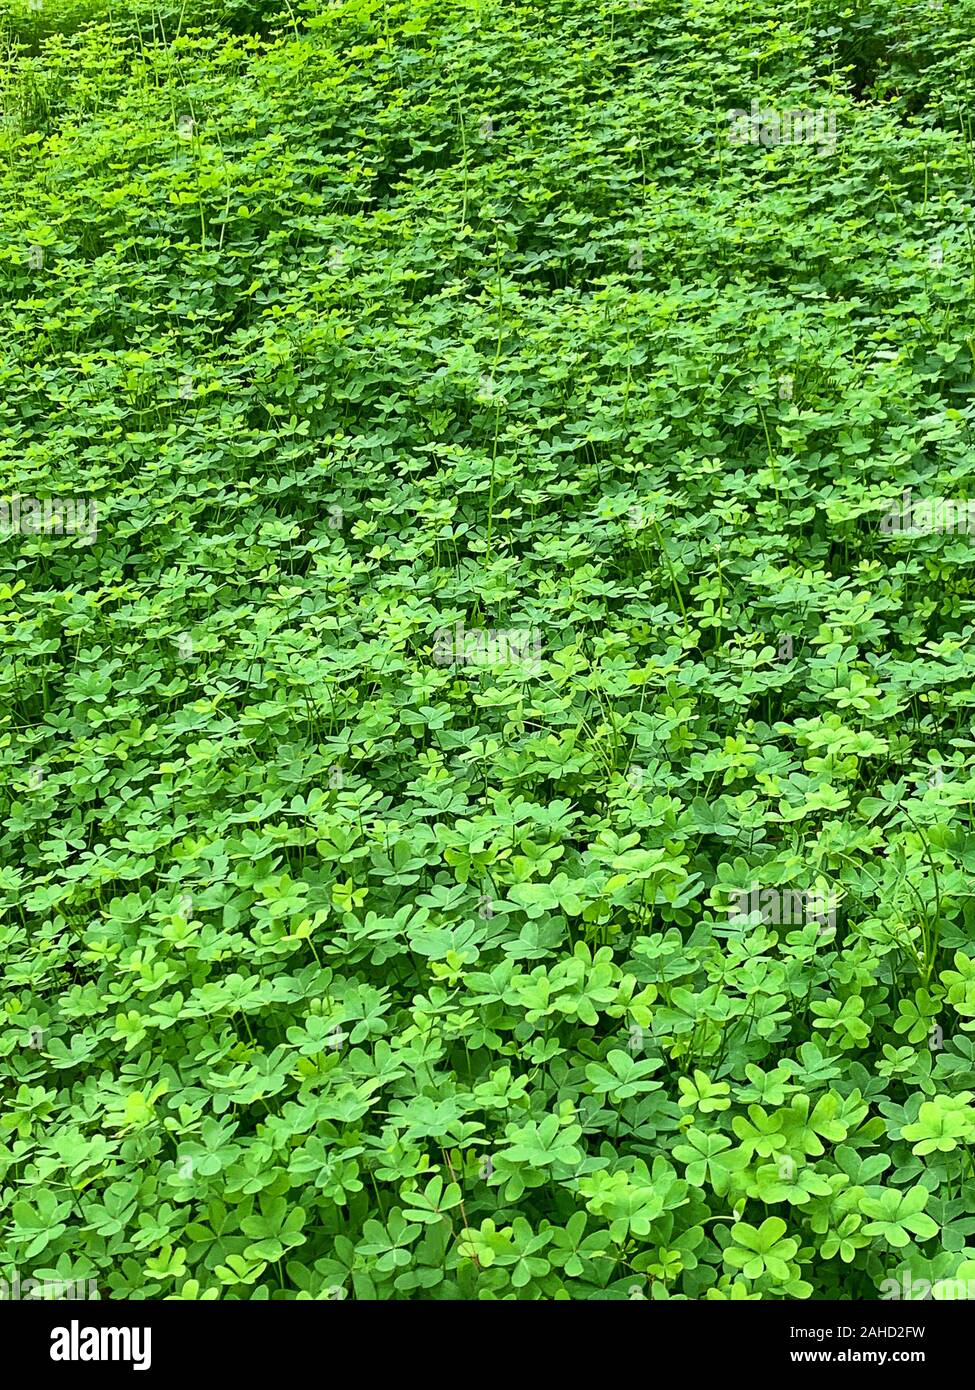 Green clover meadow. Field of Bermuda buttercup, Oxalis pes-caprae, with heart-shaped leaves, a flowering plant and evergreen in wood sorrel family. Stock Photo